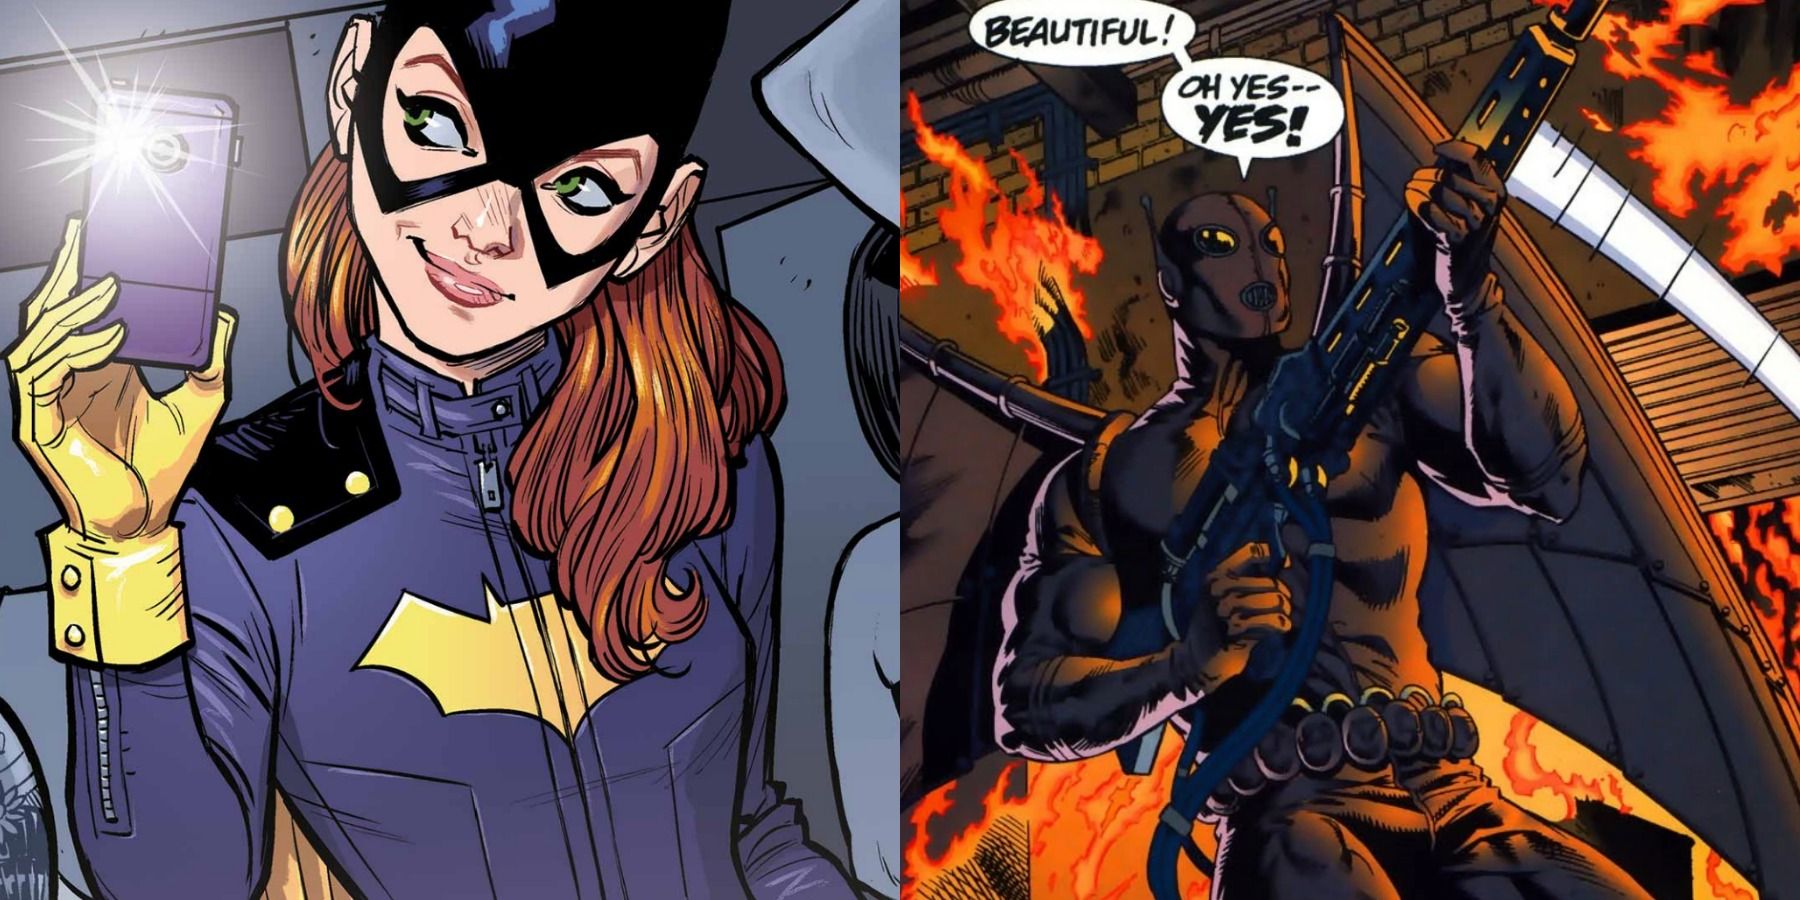 A split image depicts Batgirl and Firefly from DC Comics